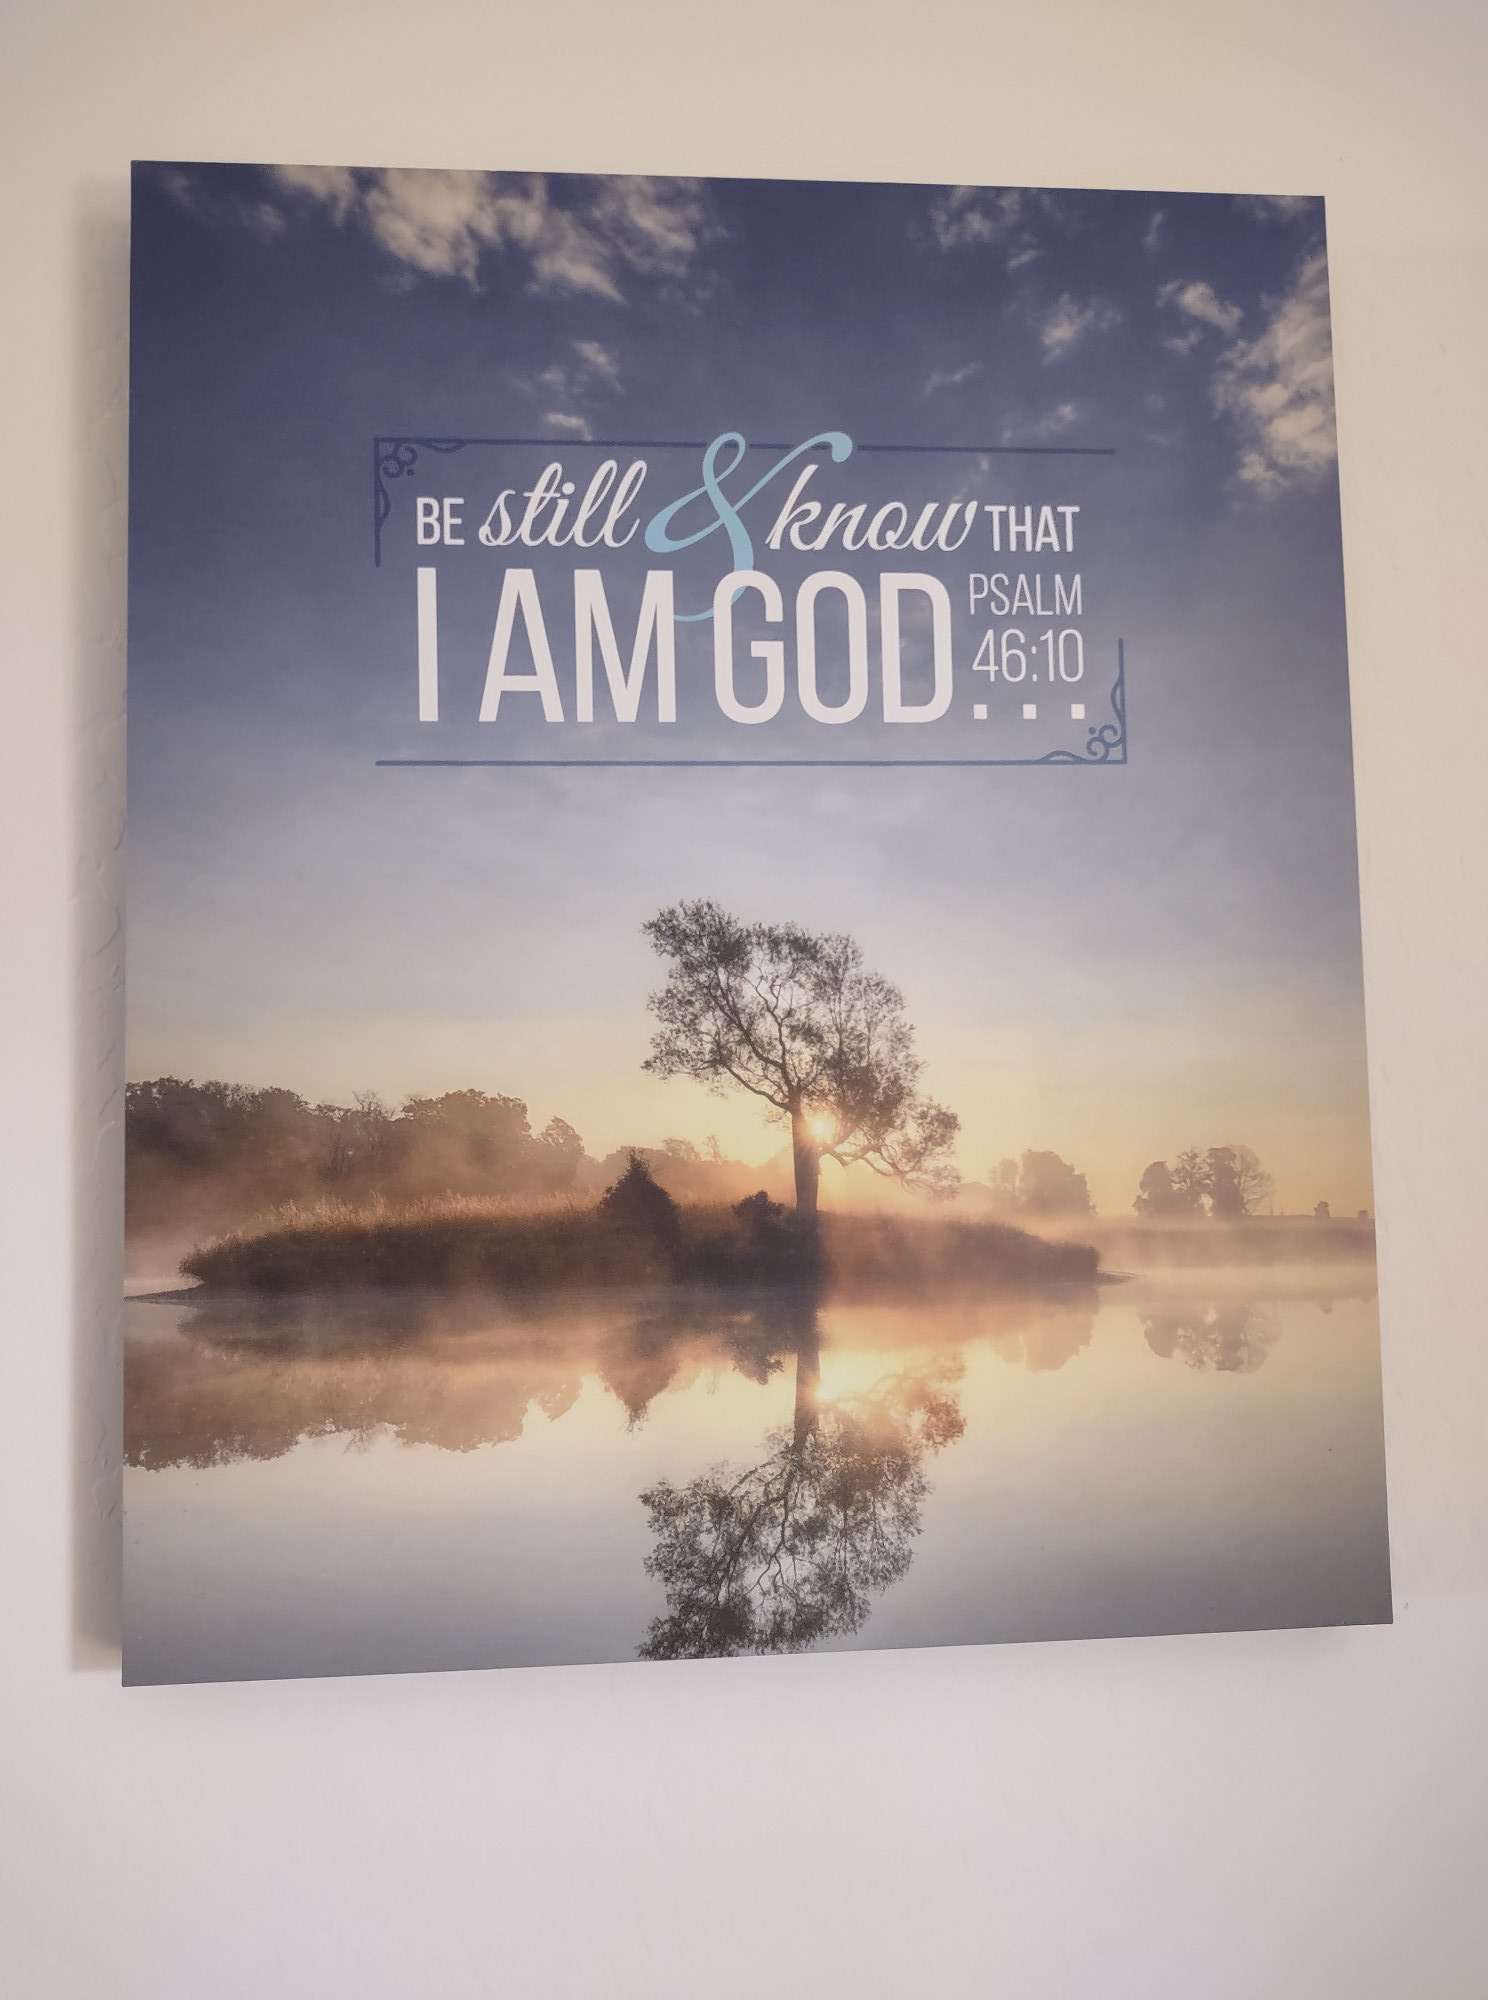 Scripture Walls Be Still and Know That I Am God Lake Psalm 46:10 Christian Wall Art Bible Verse Print Ready to Hang Unframed-Express Your Love Gifts